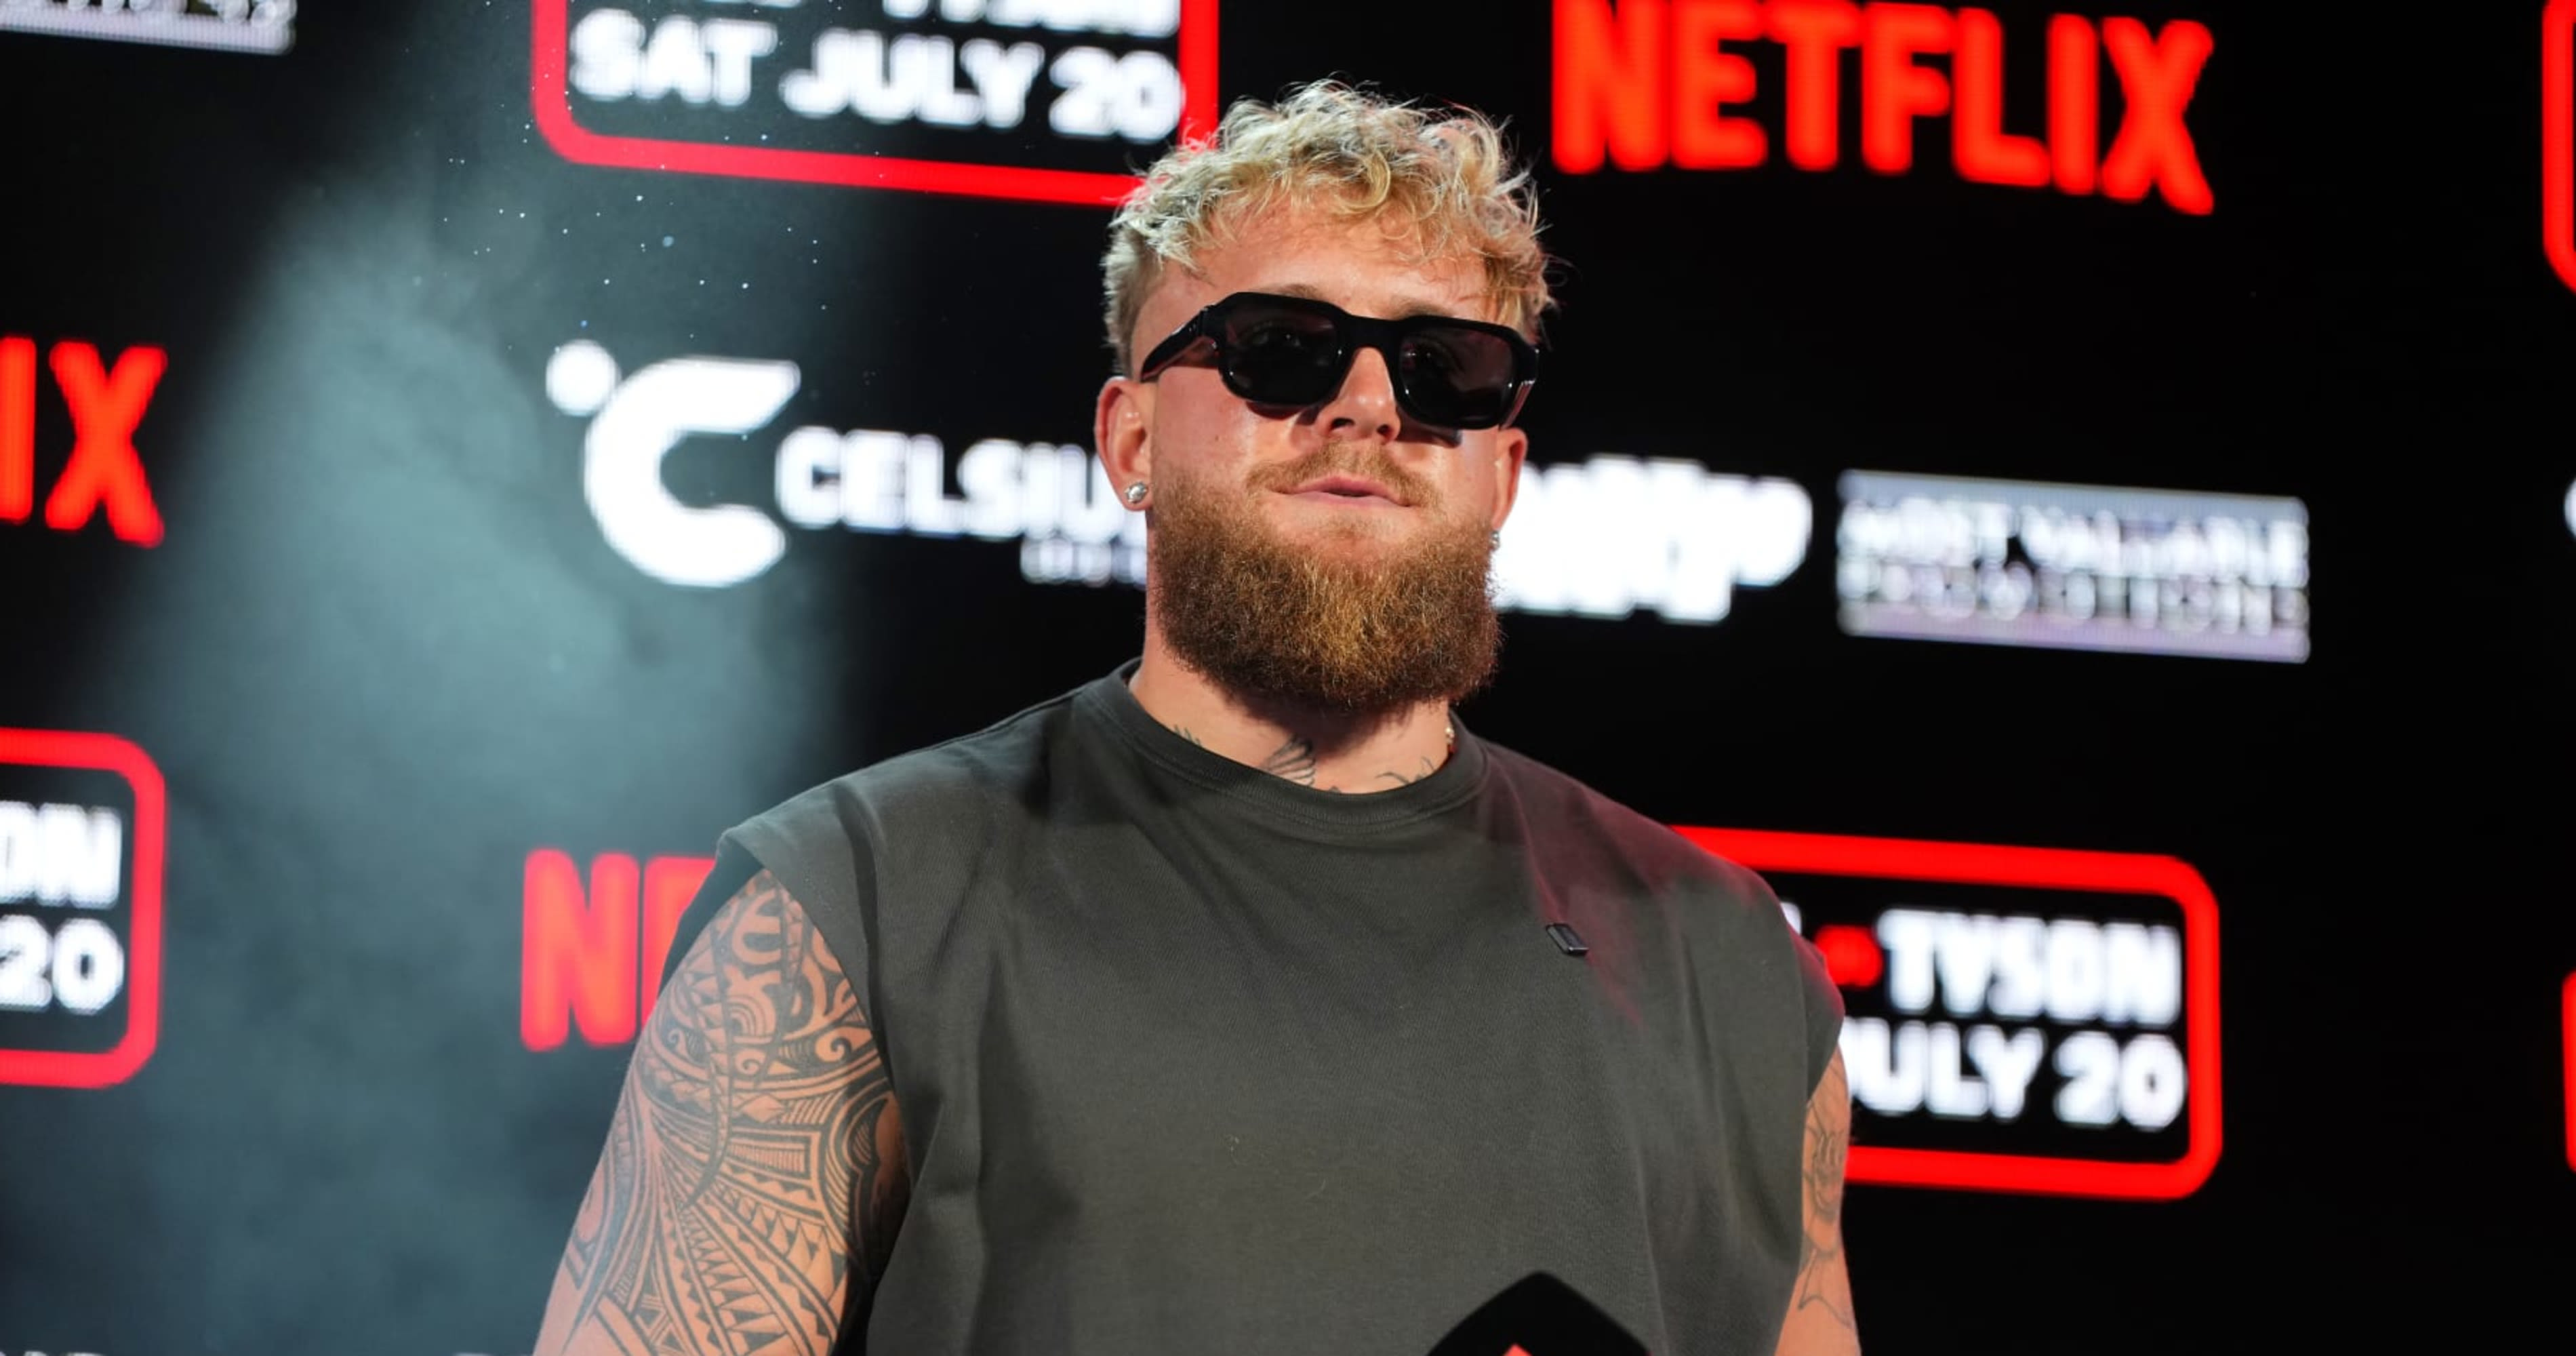 Jake Paul Says He Needs 'Mike Tyson Energy' in Fight vs. Icon: 'Legend Must Fall'